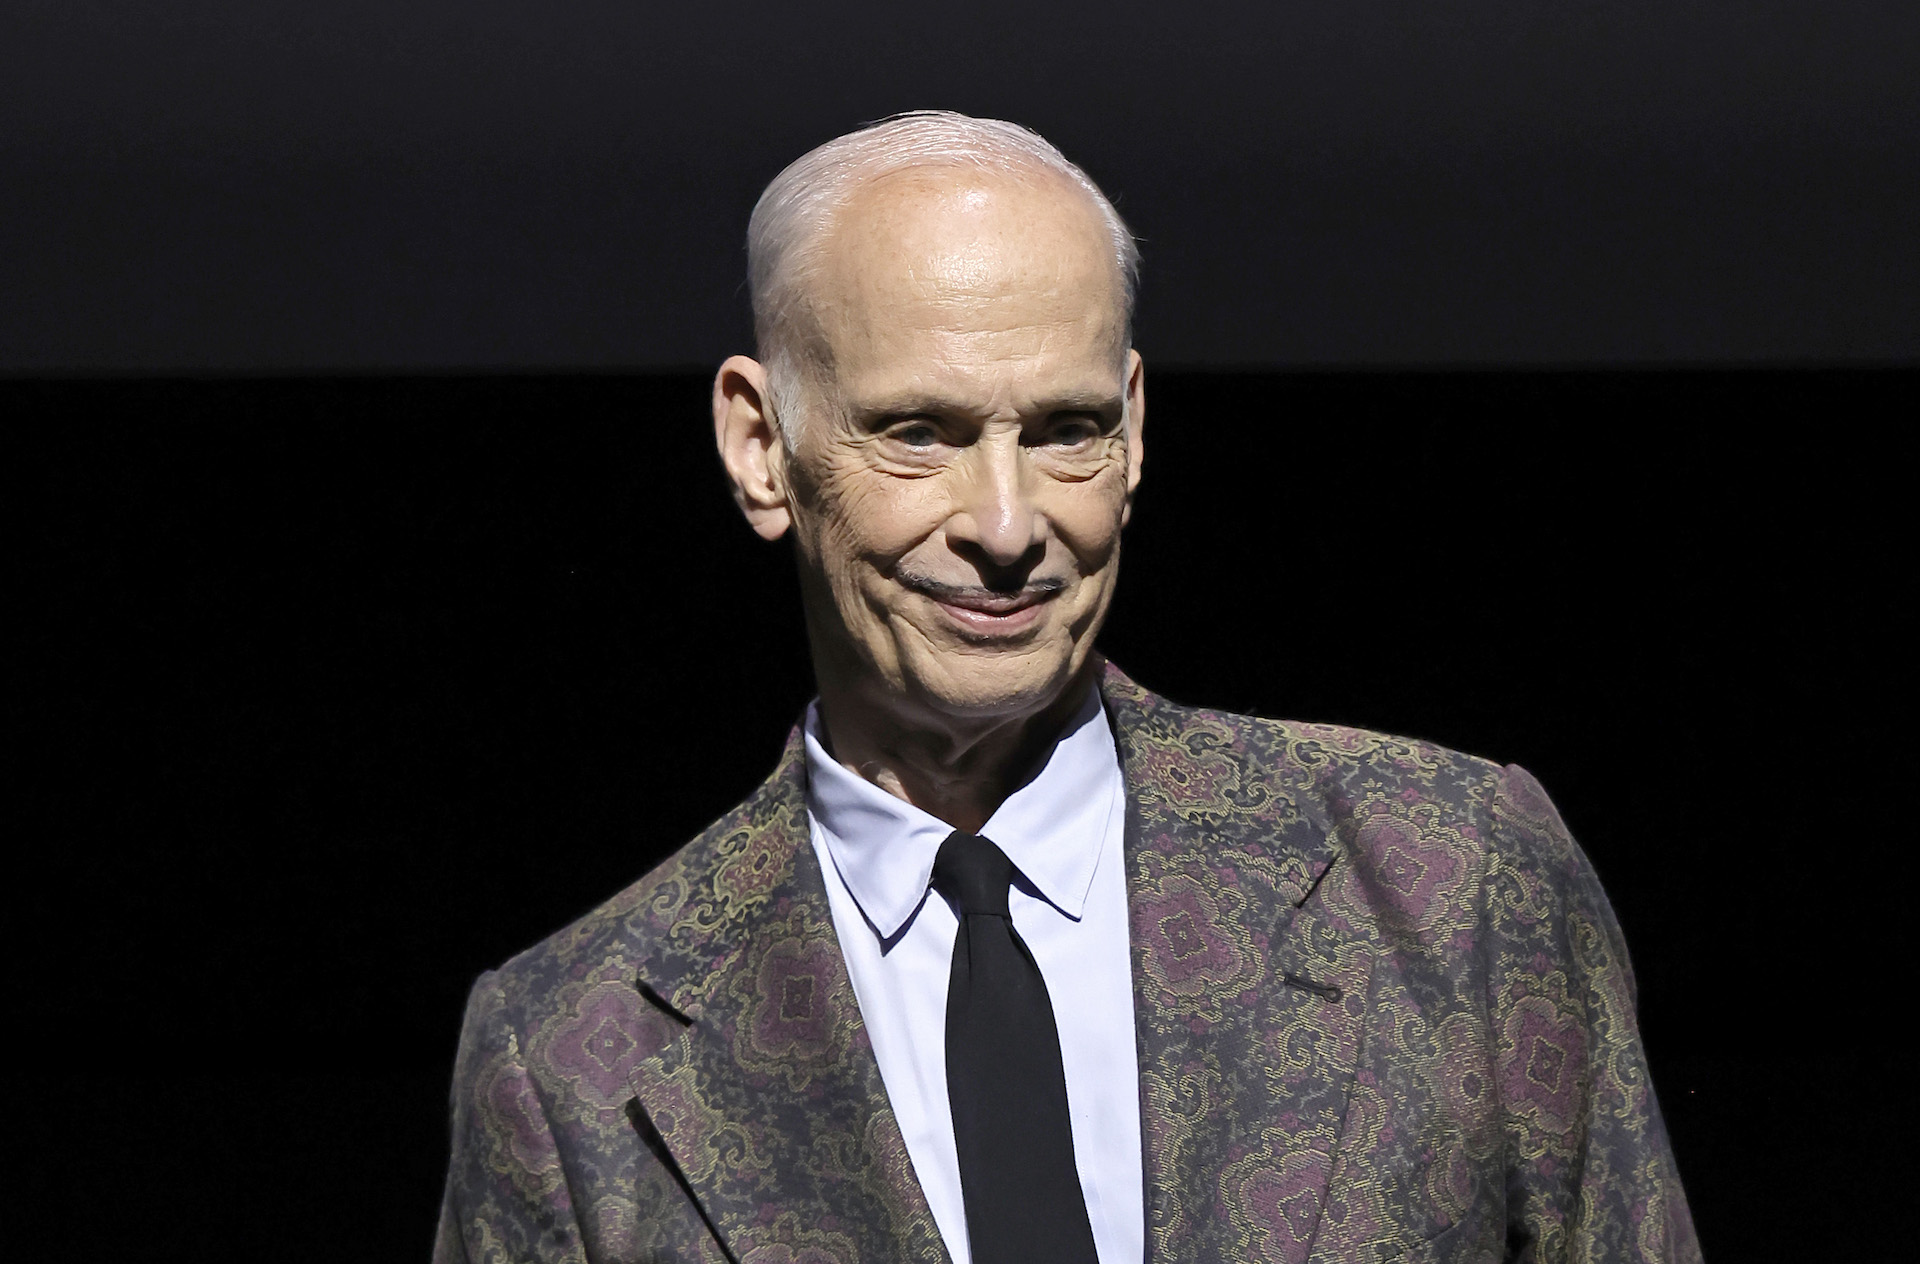 LOS ANGELES, CALIFORNIA - SEPTEMBER 14: John Waters attends "John Waters: Pope Of Trash" Press Preview Hosted by The Academy Museum at Academy Museum of Motion Pictures on September 14, 2023 in Los Angeles, California. (Photo by Kevin Winter/Getty Images)